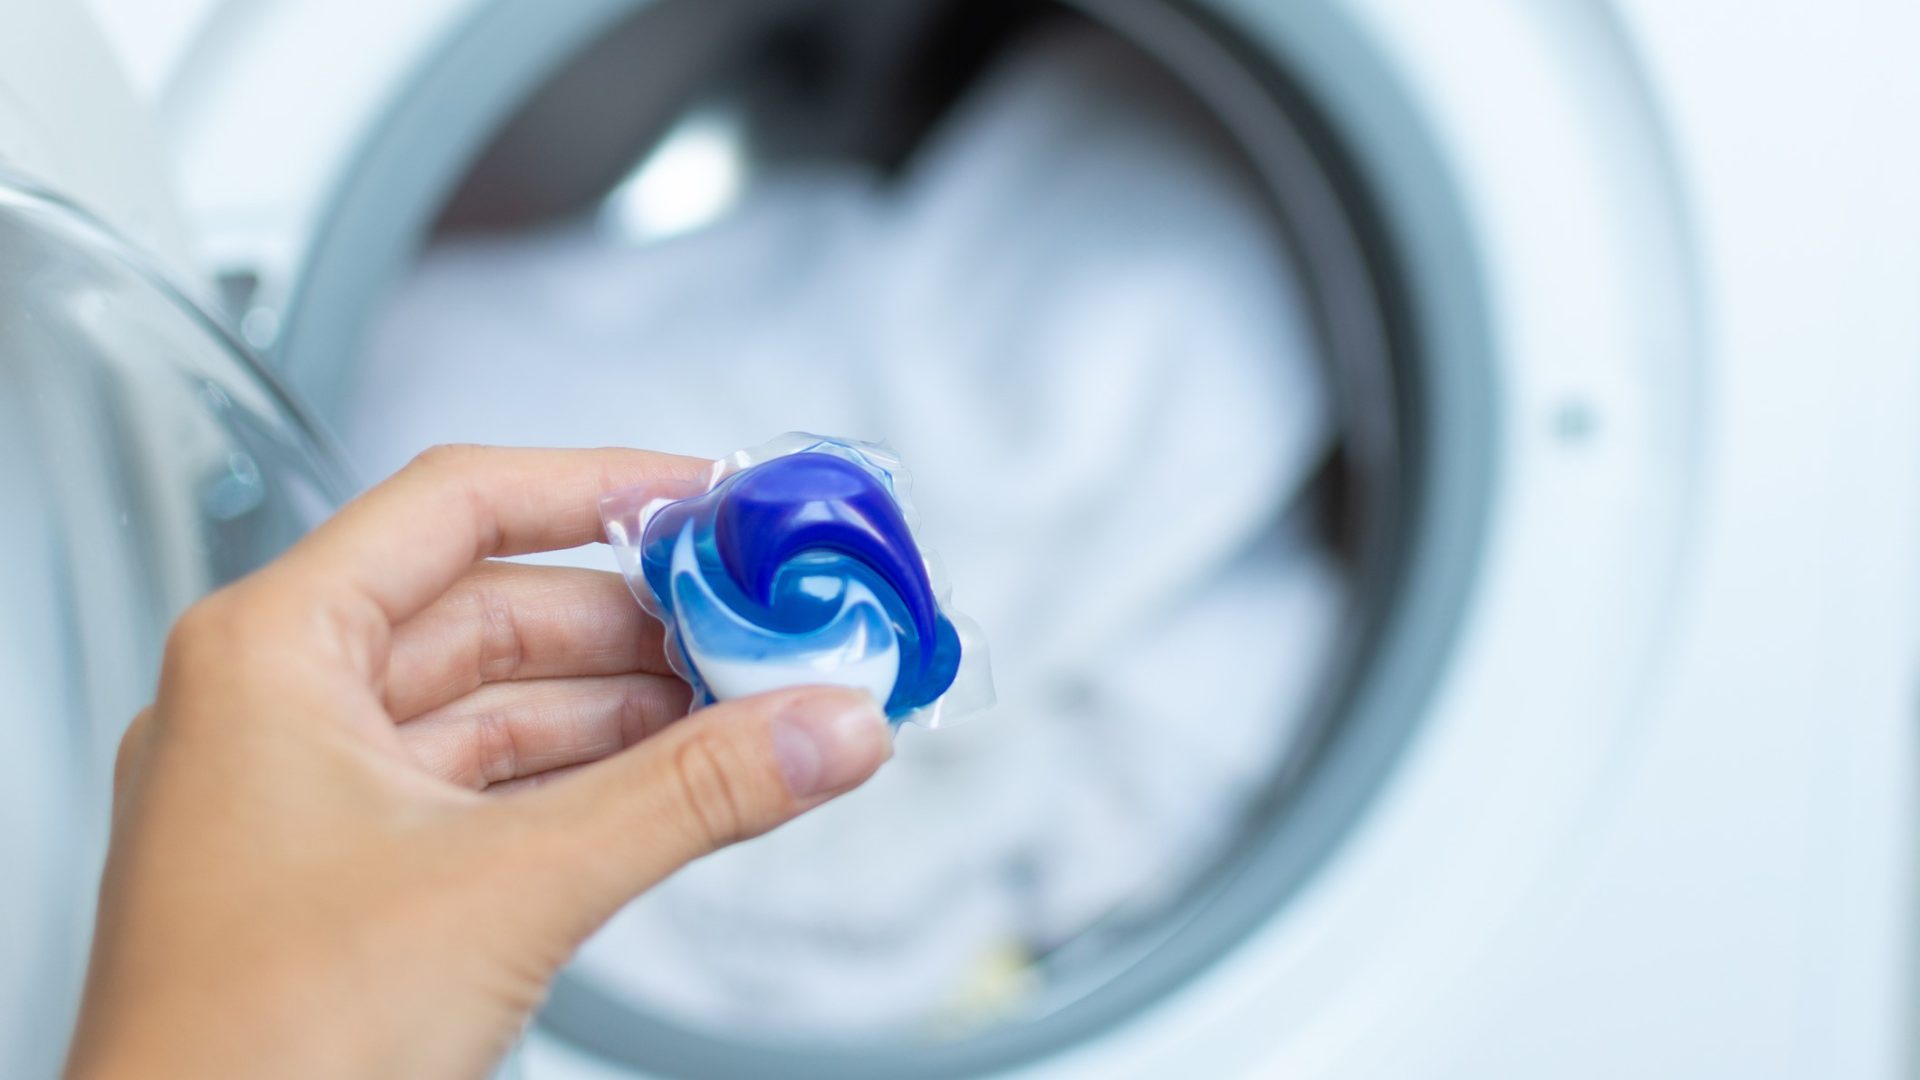 Use a ball of aluminum foil to eliminate static in the dryer - CNET